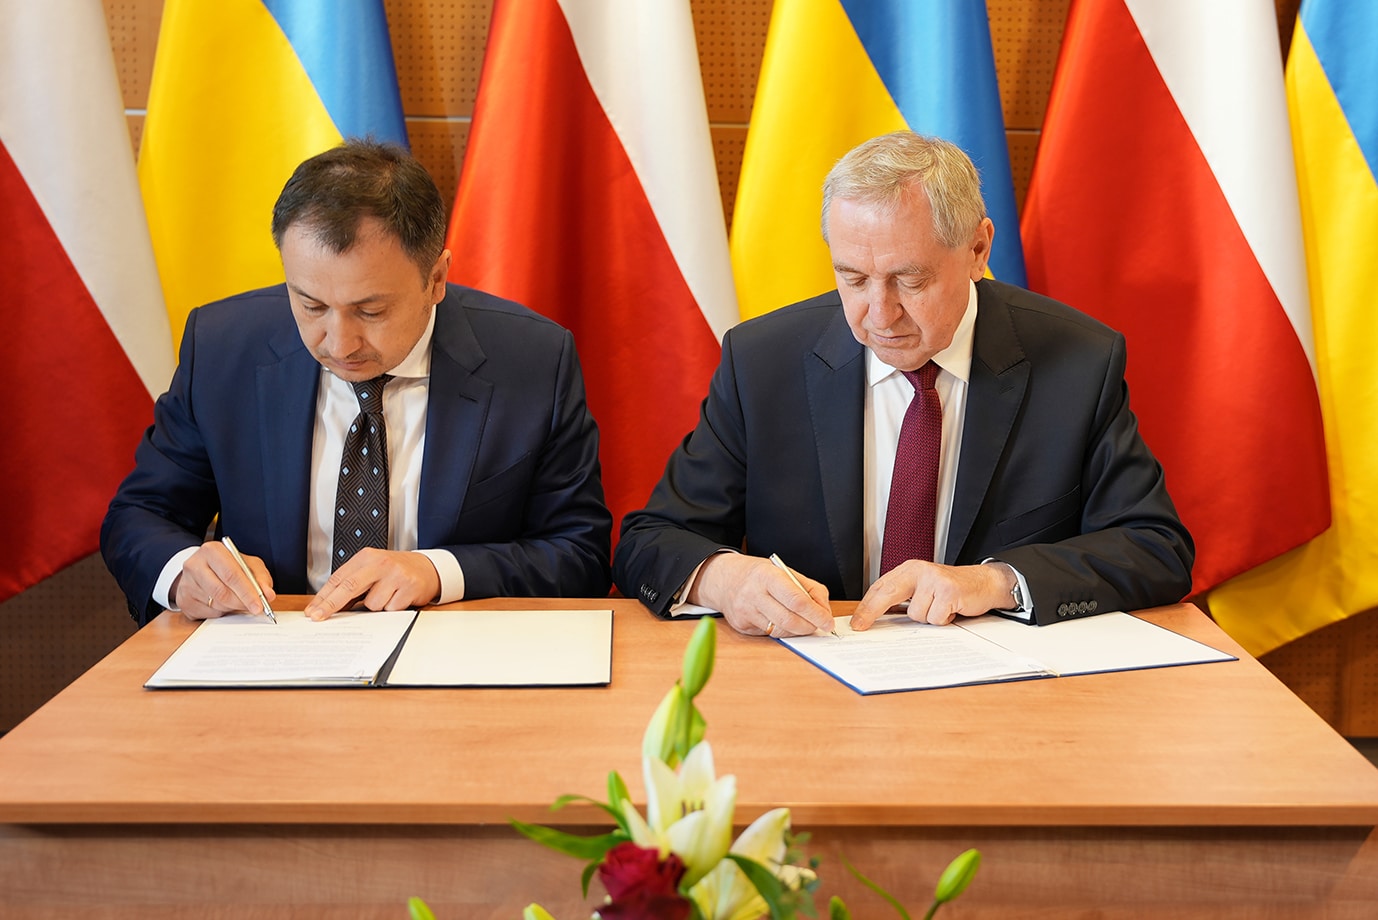 Ukraine and Poland signed a joint statement on the export of Ukrainian grain